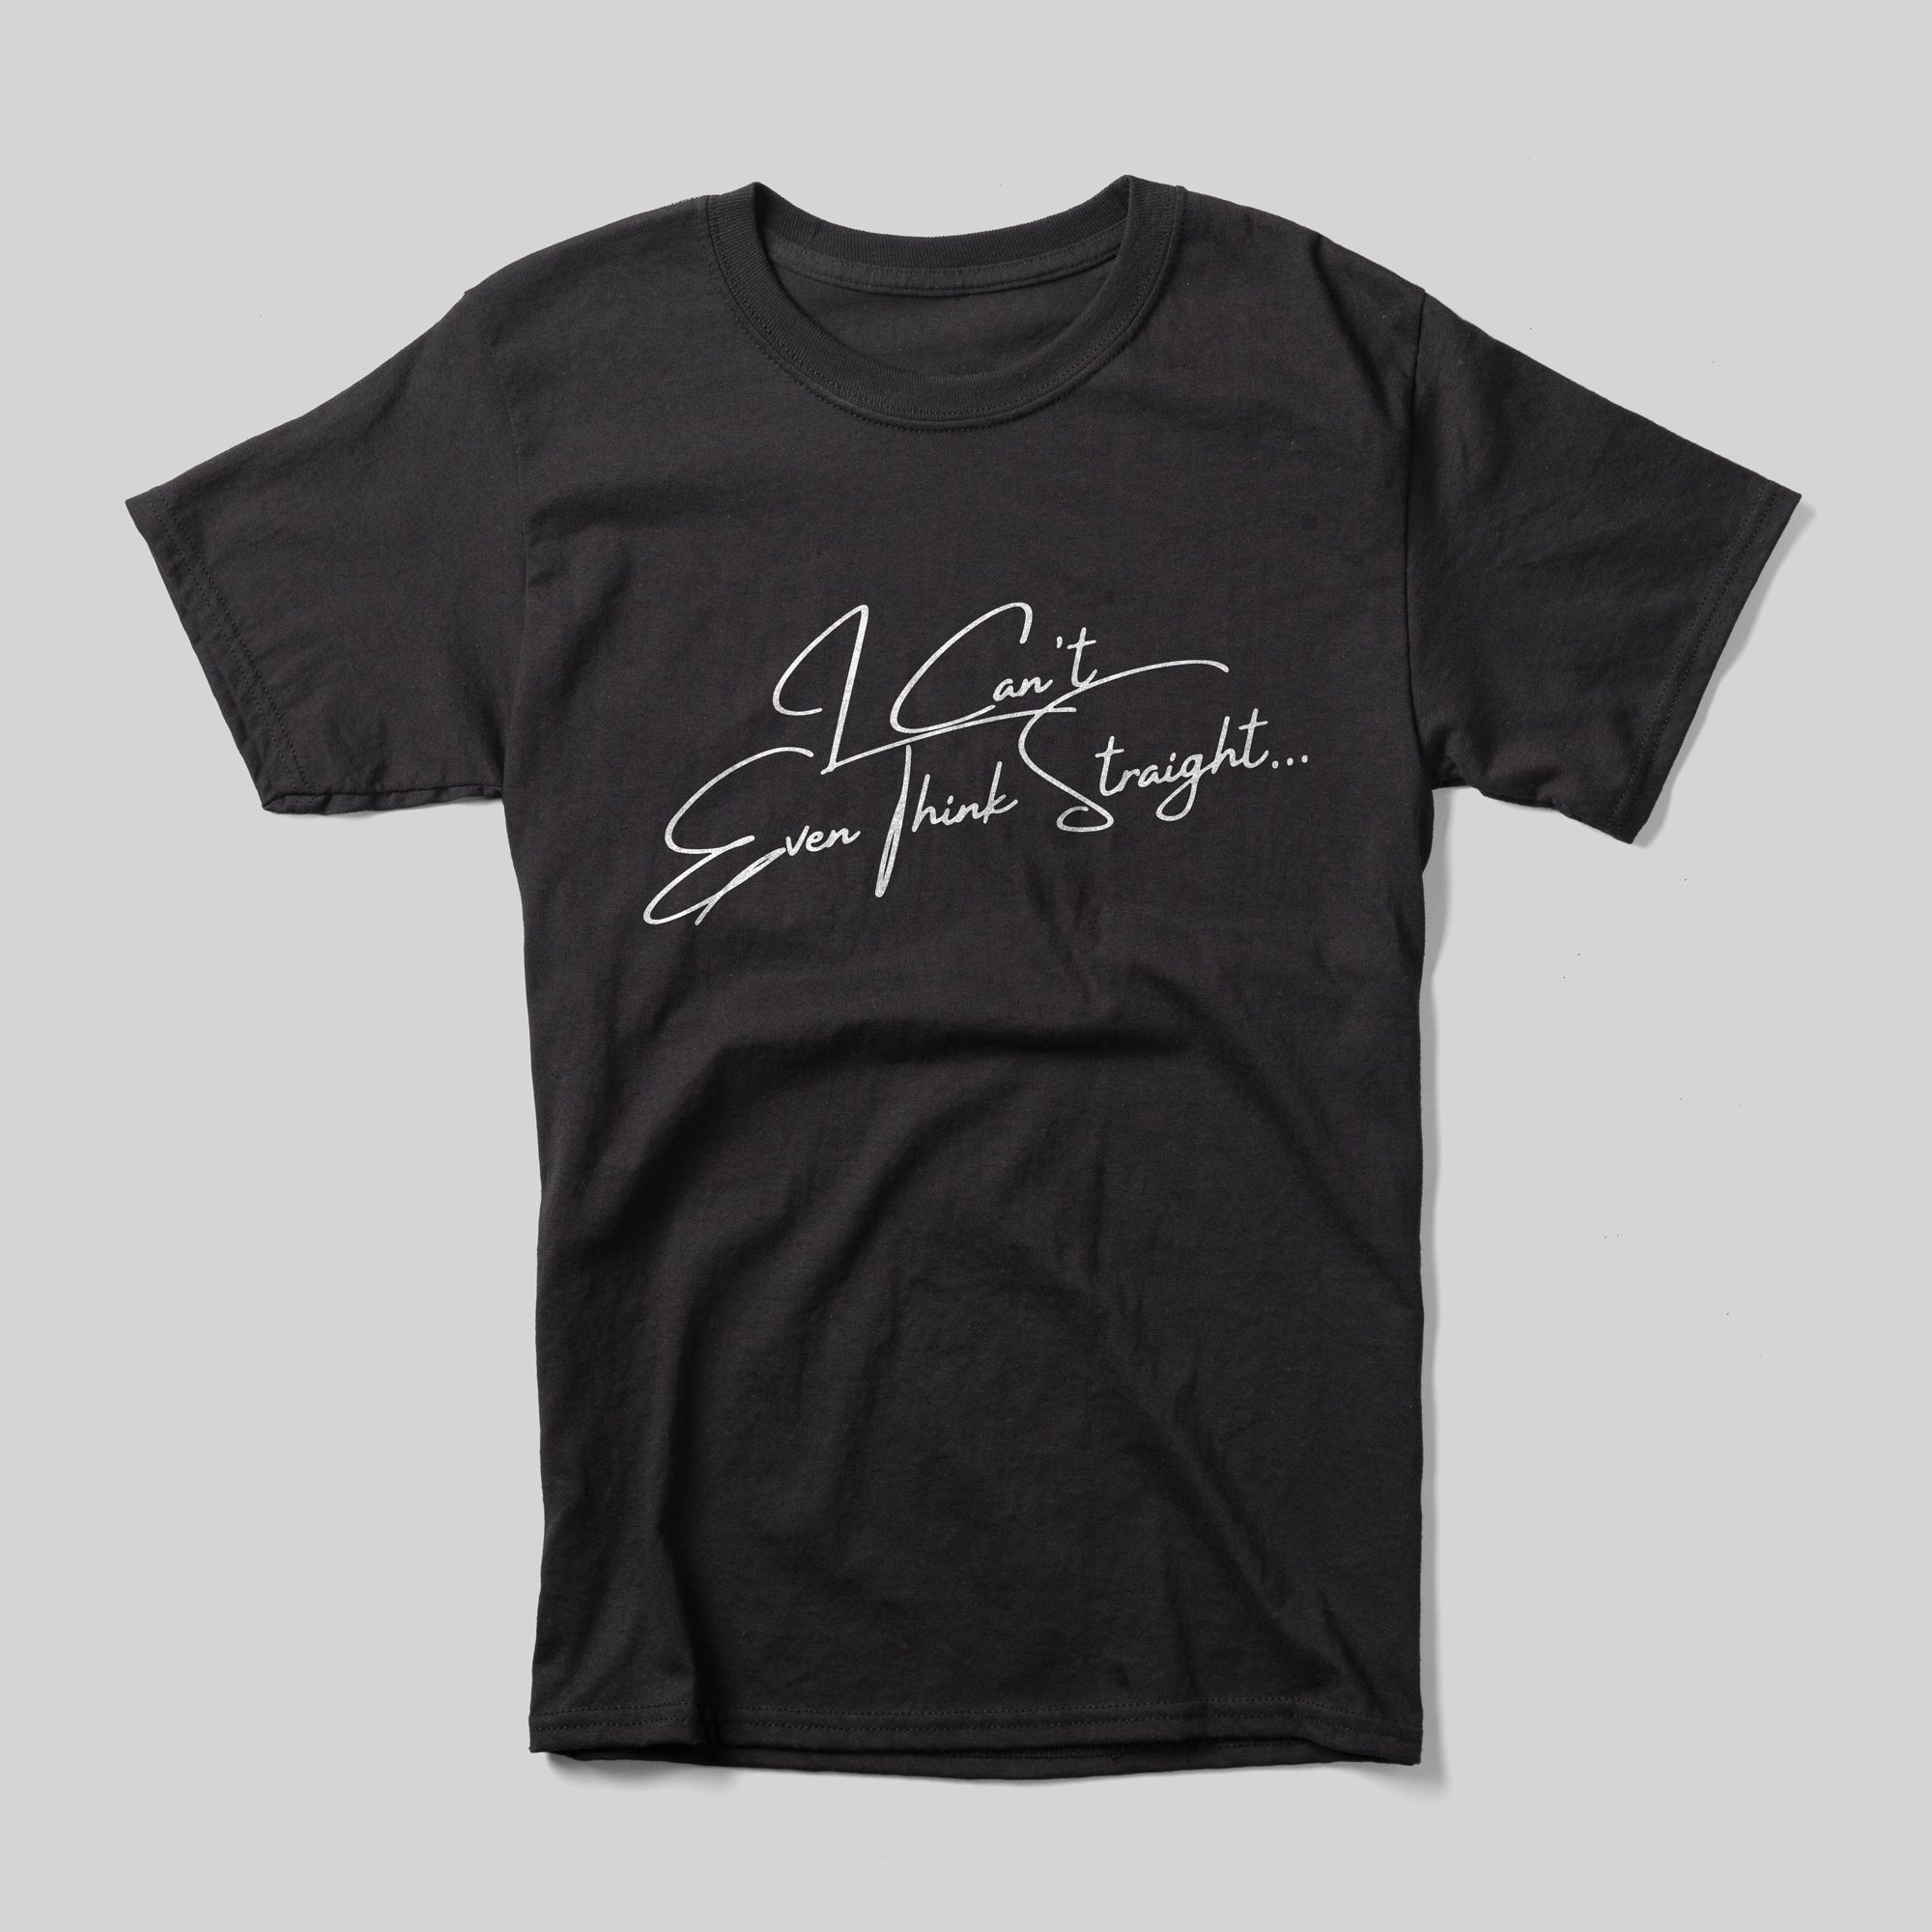 A black t-shirt that reads I can't even think straight... in white cursive text.